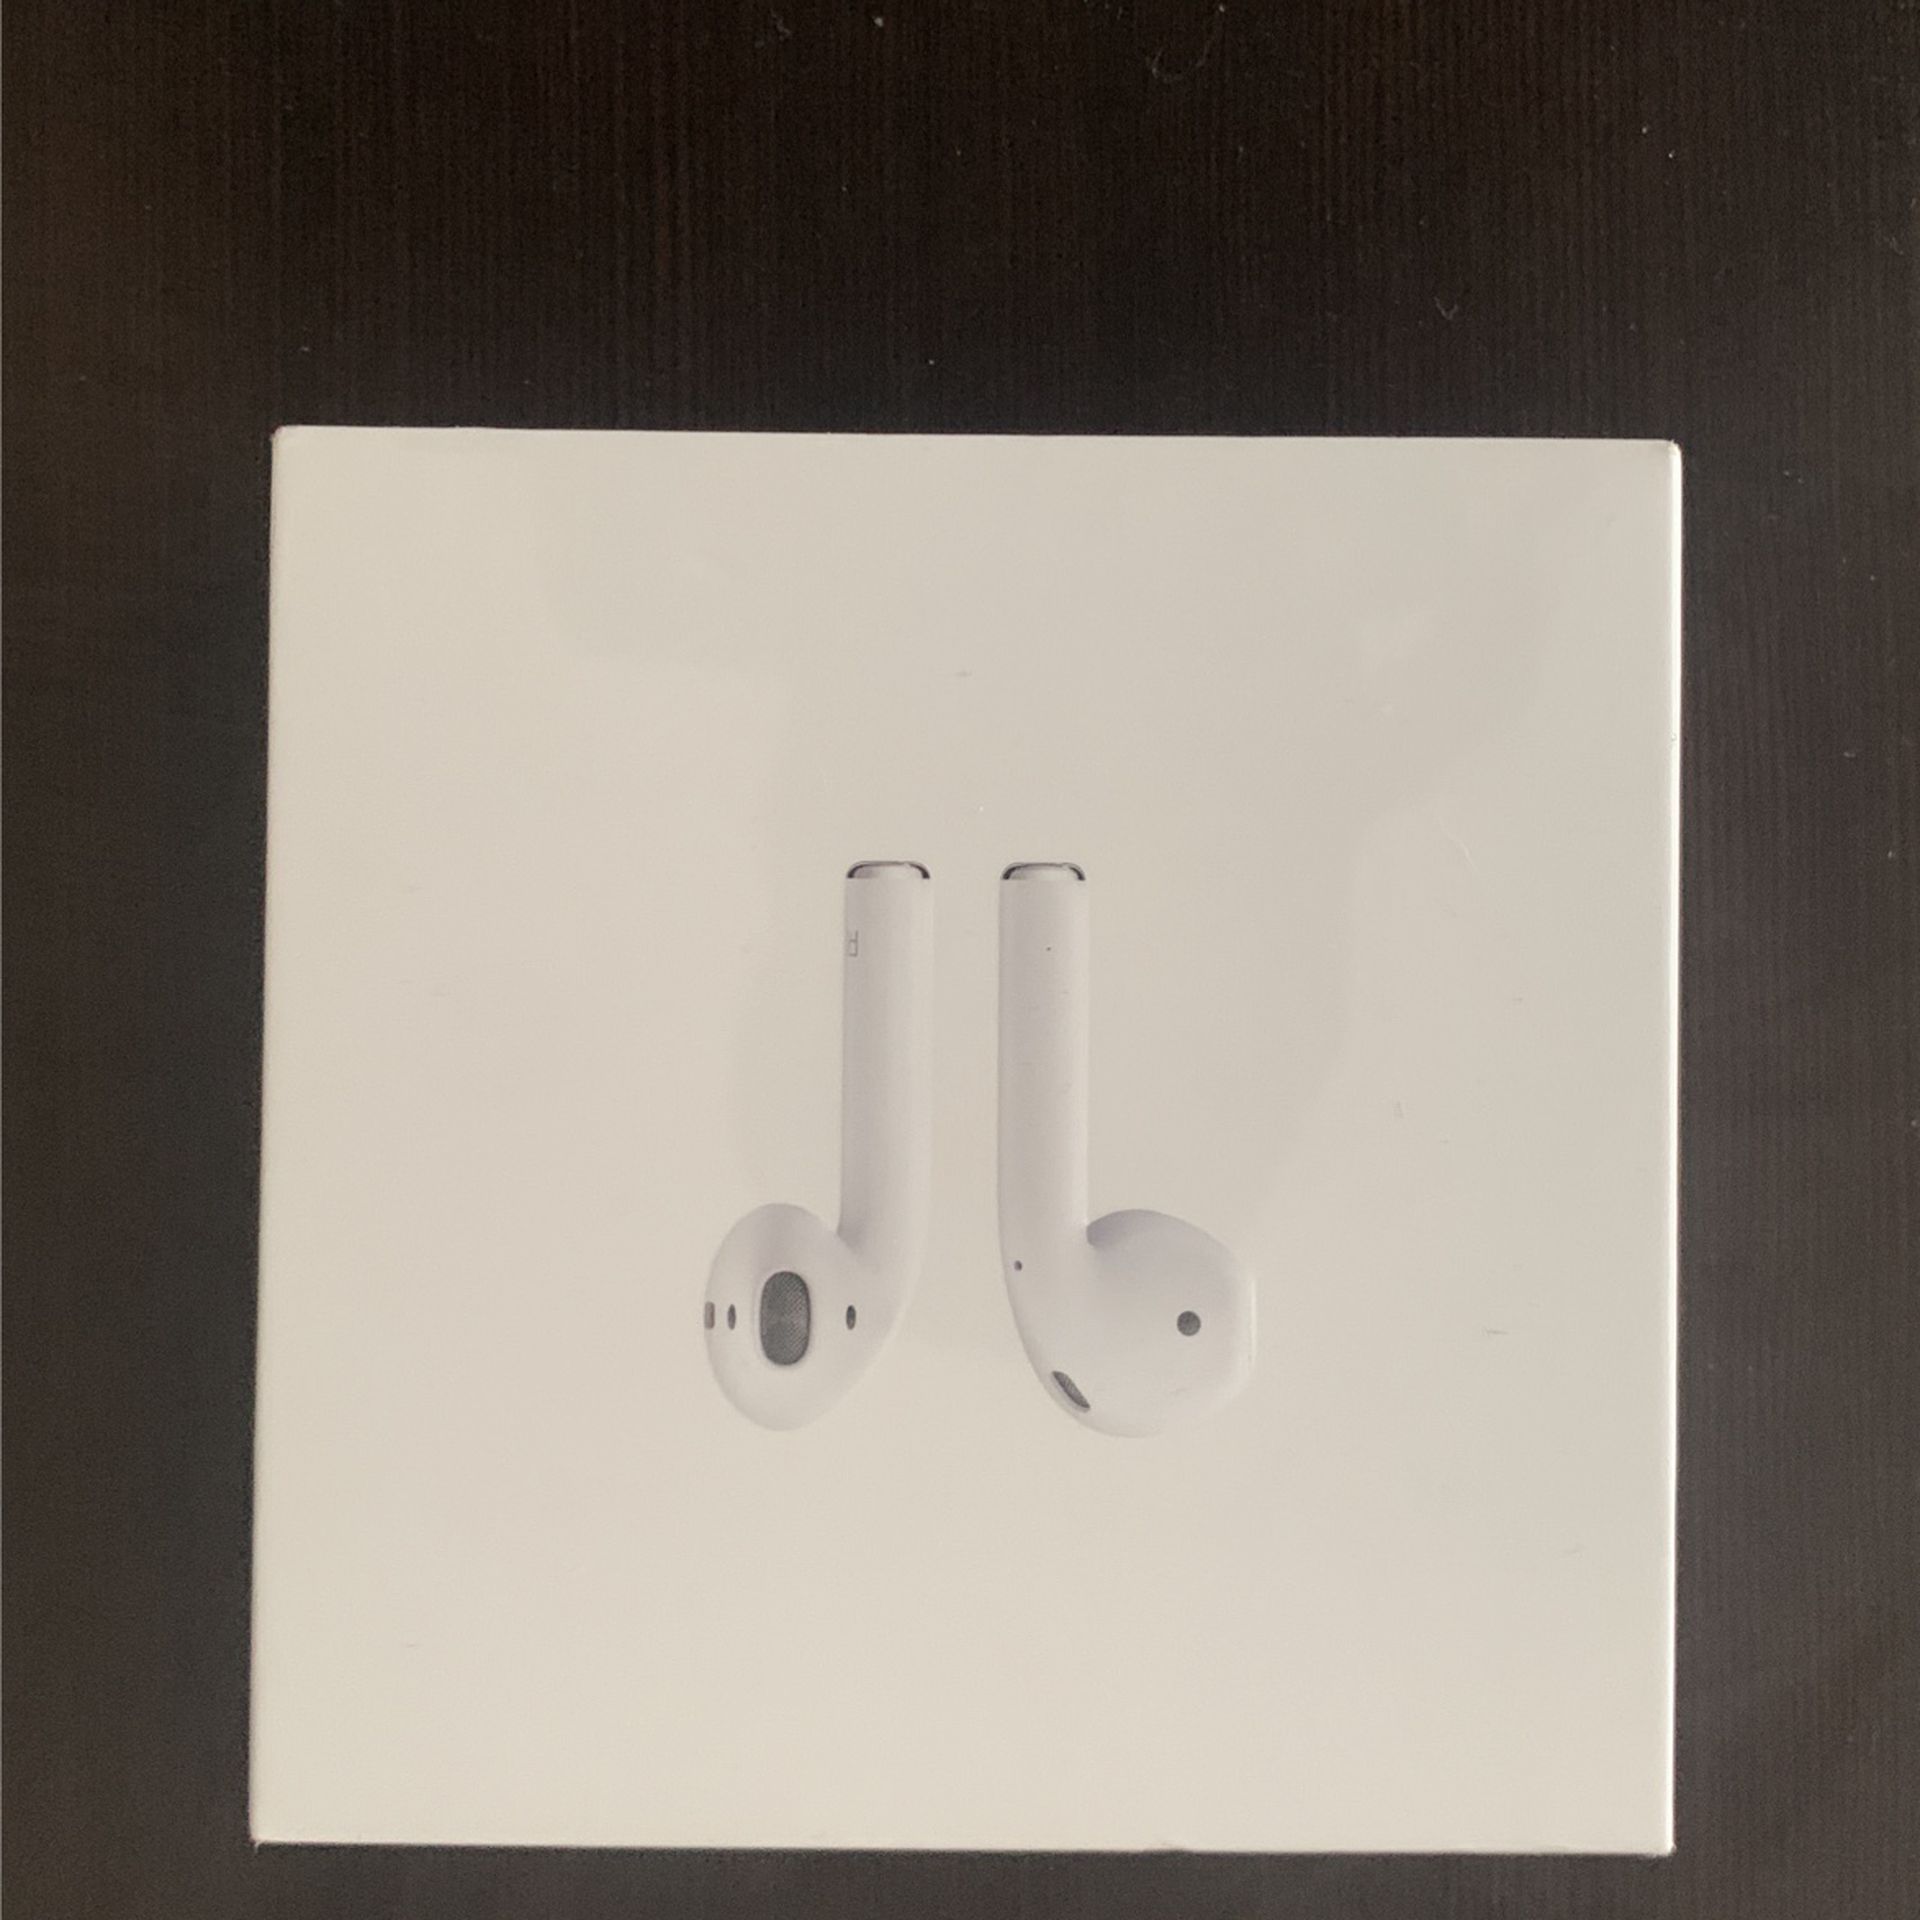 iPhone Airpods 